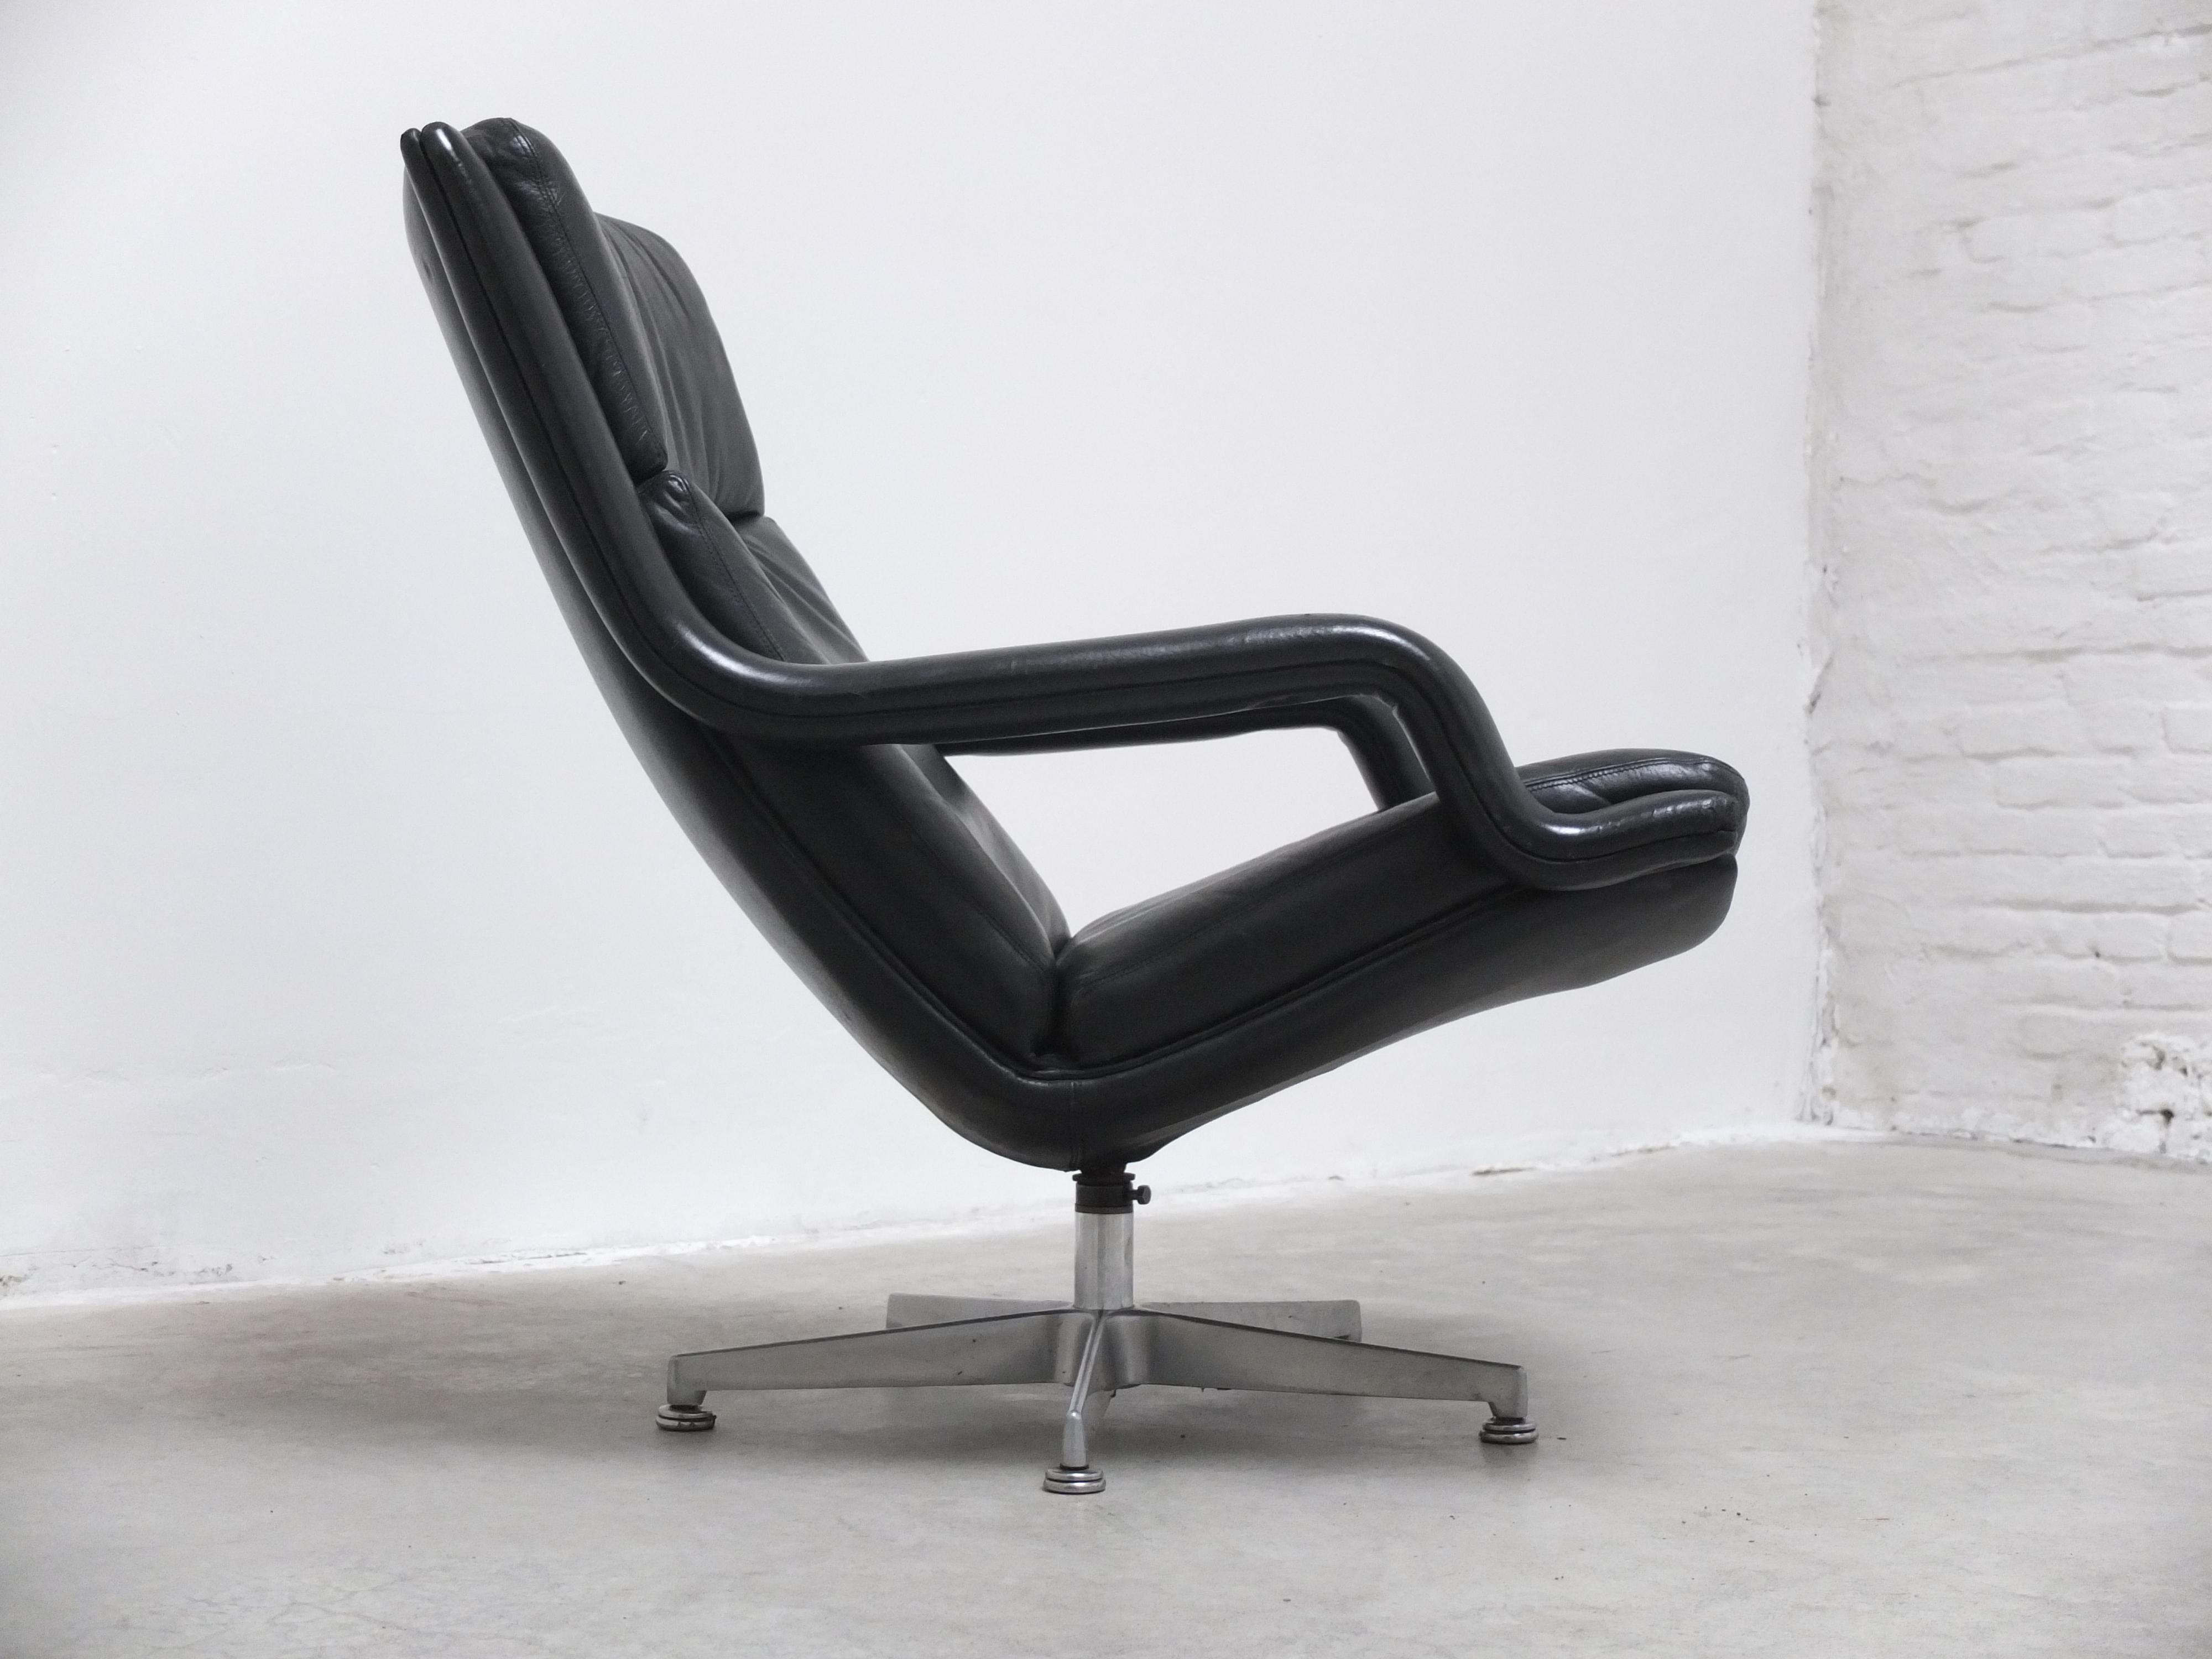 Metal Leather 'F152' Swivel Lounge Chairs by Geoffrey Harcourt for Artifort, 1970s For Sale